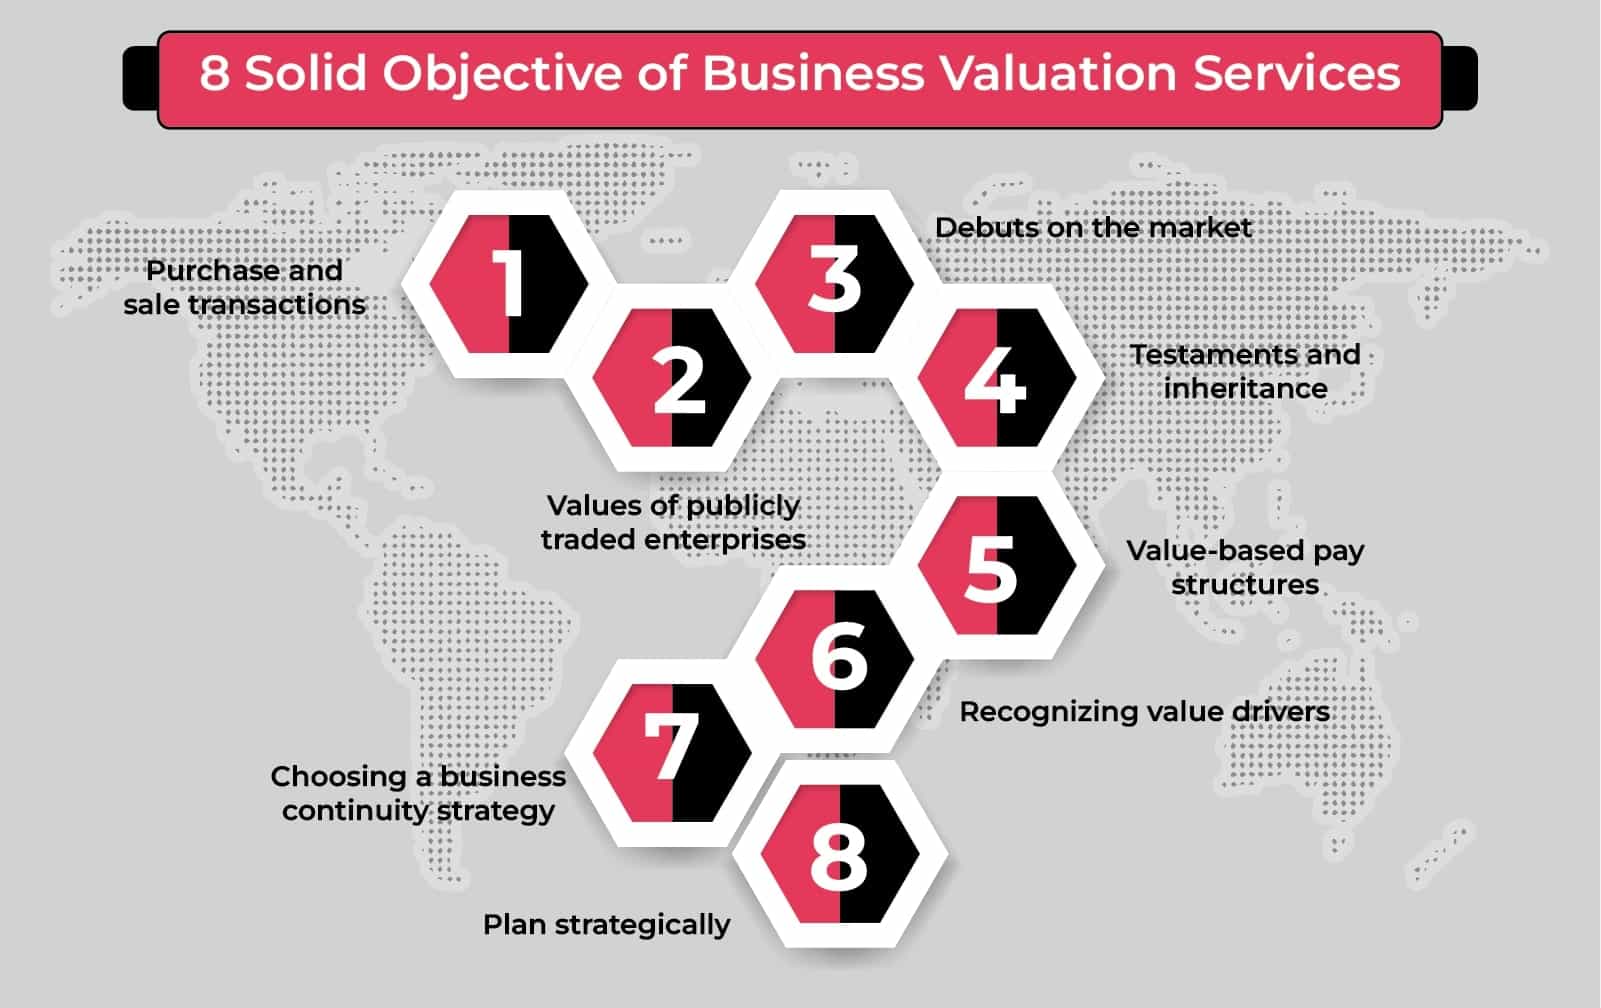 Objective of Business Valuation Services